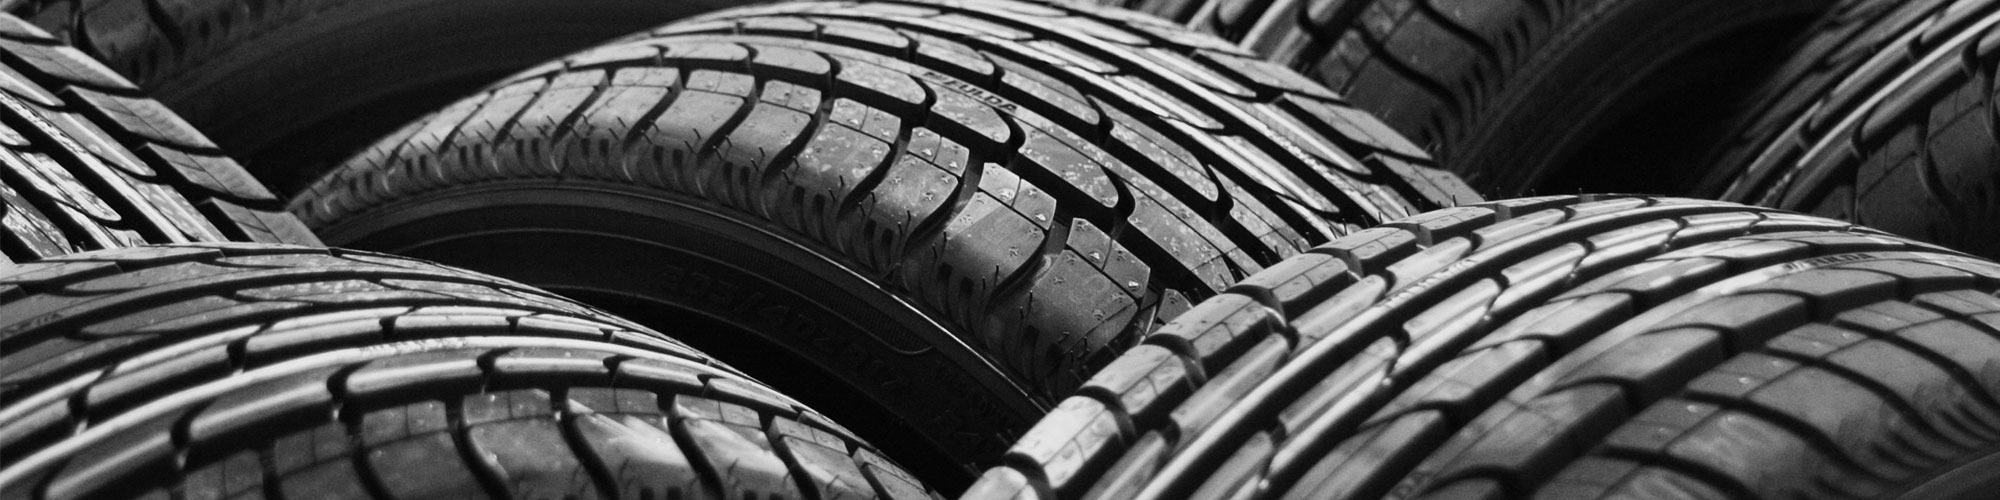 Tyres at Number One Motor Co Ltd, Norwich